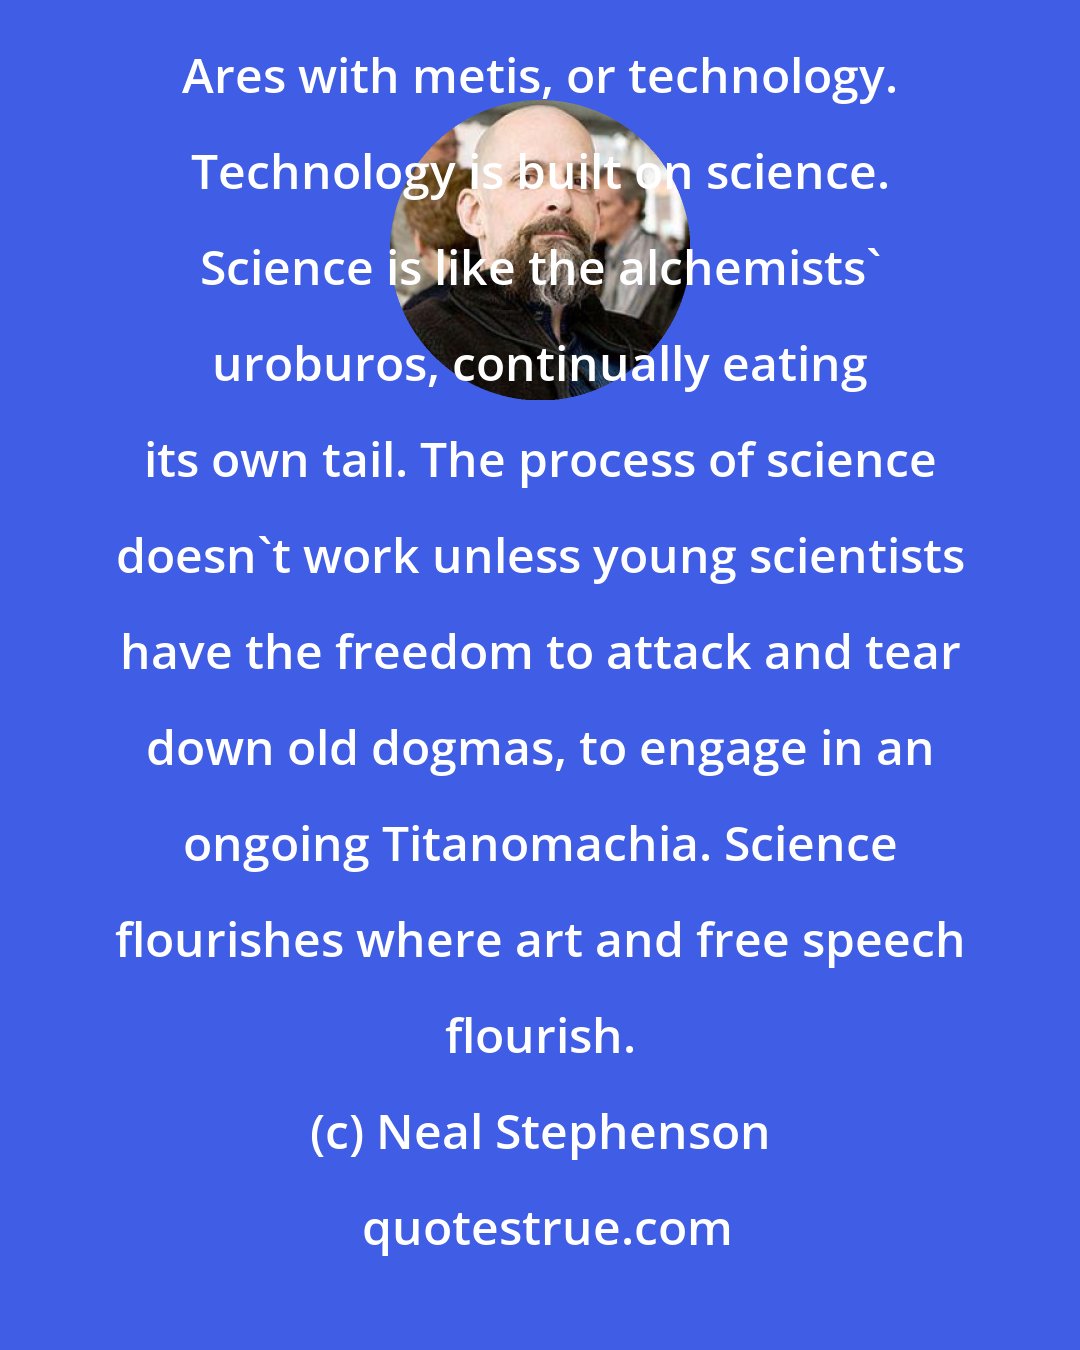 Neal Stephenson: Ares always reemerges from the chaos. It will never go away. Athenian civilization defends itself from the forces of Ares with metis, or technology. Technology is built on science. Science is like the alchemists' uroburos, continually eating its own tail. The process of science doesn't work unless young scientists have the freedom to attack and tear down old dogmas, to engage in an ongoing Titanomachia. Science flourishes where art and free speech flourish.